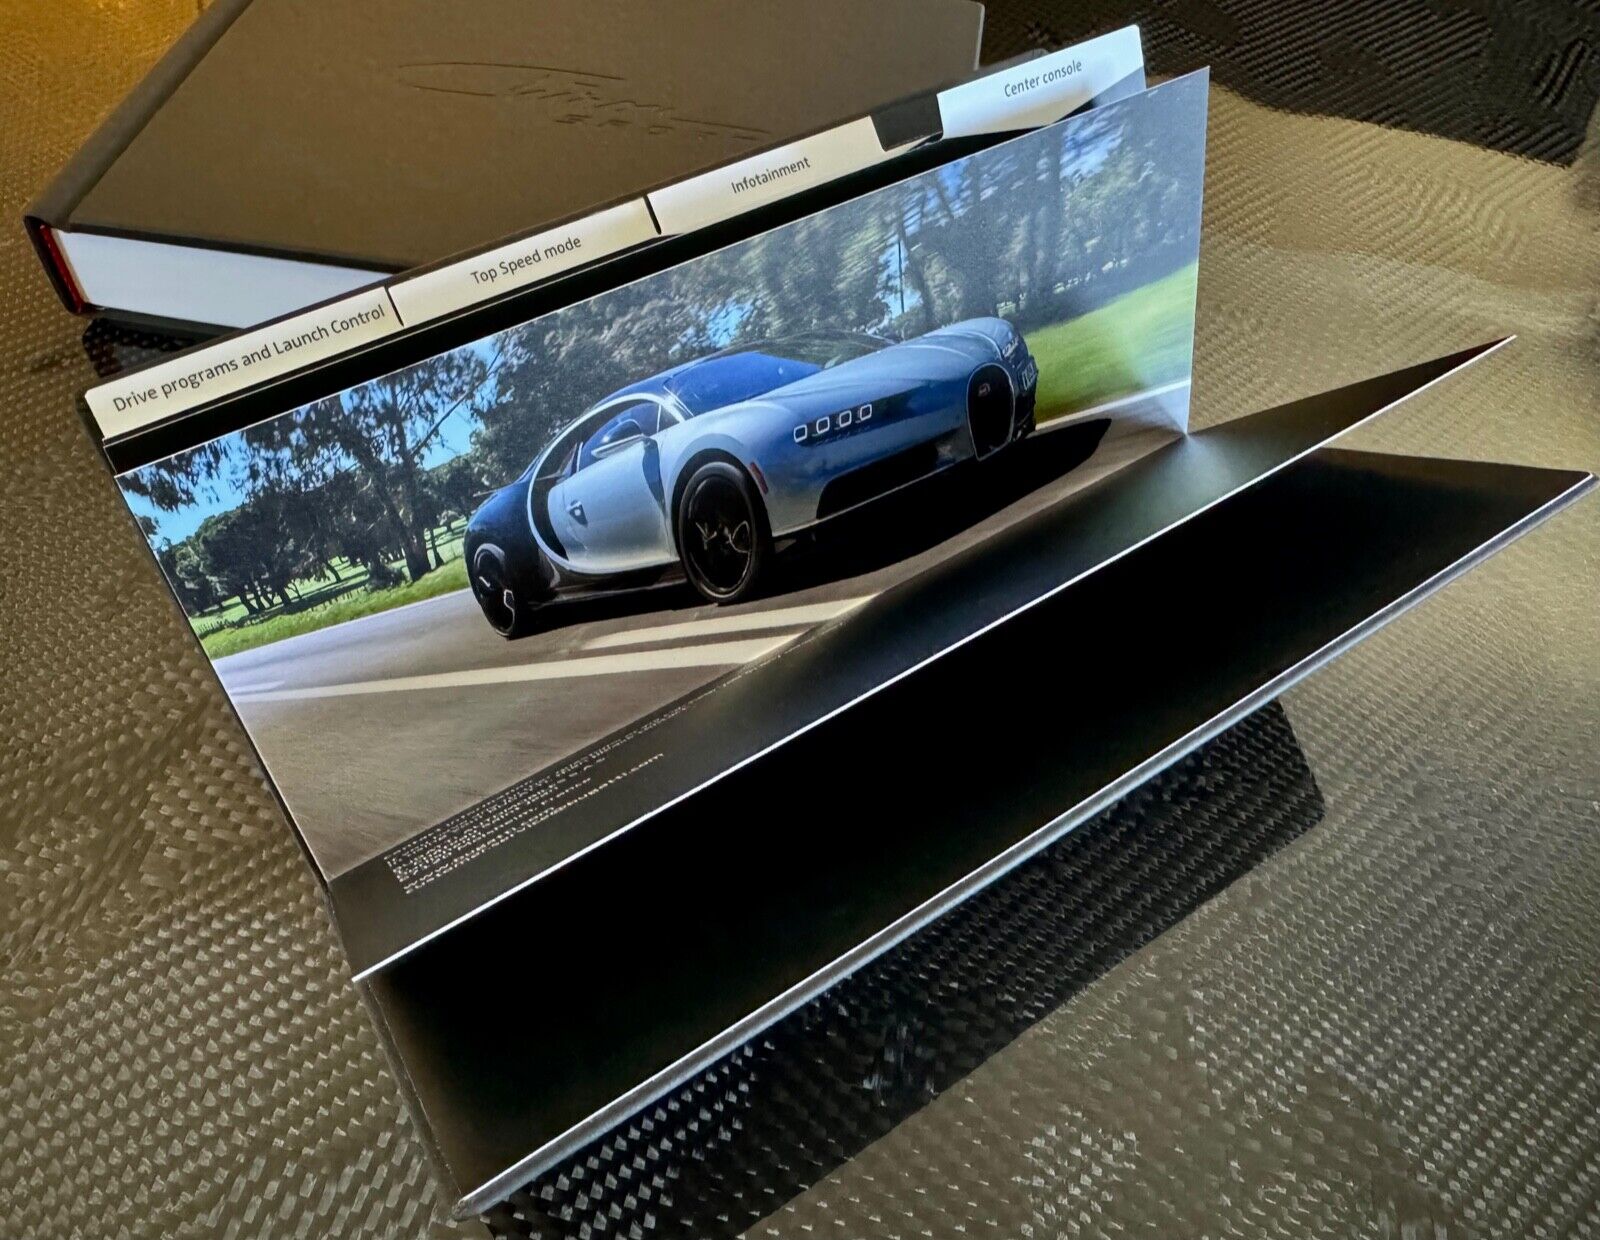 Bugatti Chiron Sport Owner's manual, Service Warranty booklet and Quick Guide